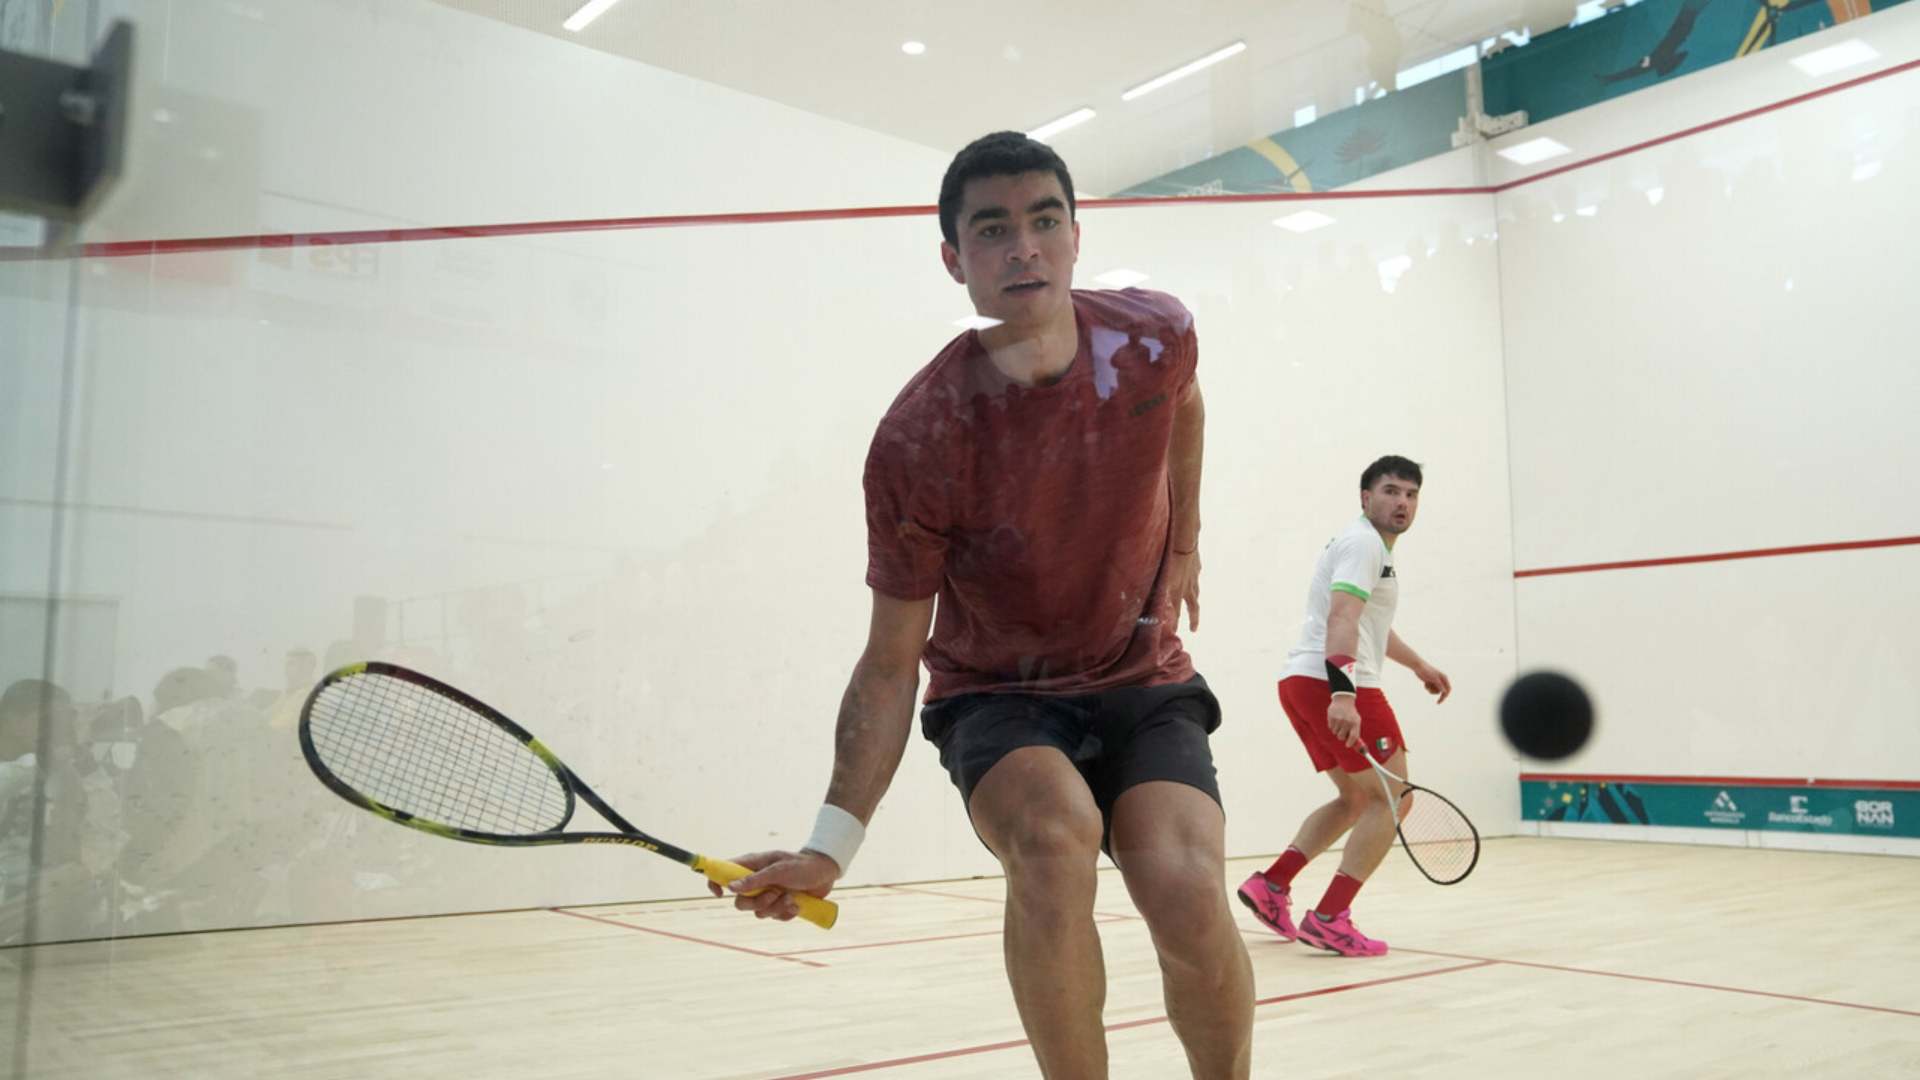 Peruvian Diego Elías is two-time Pan American champion in male's squash